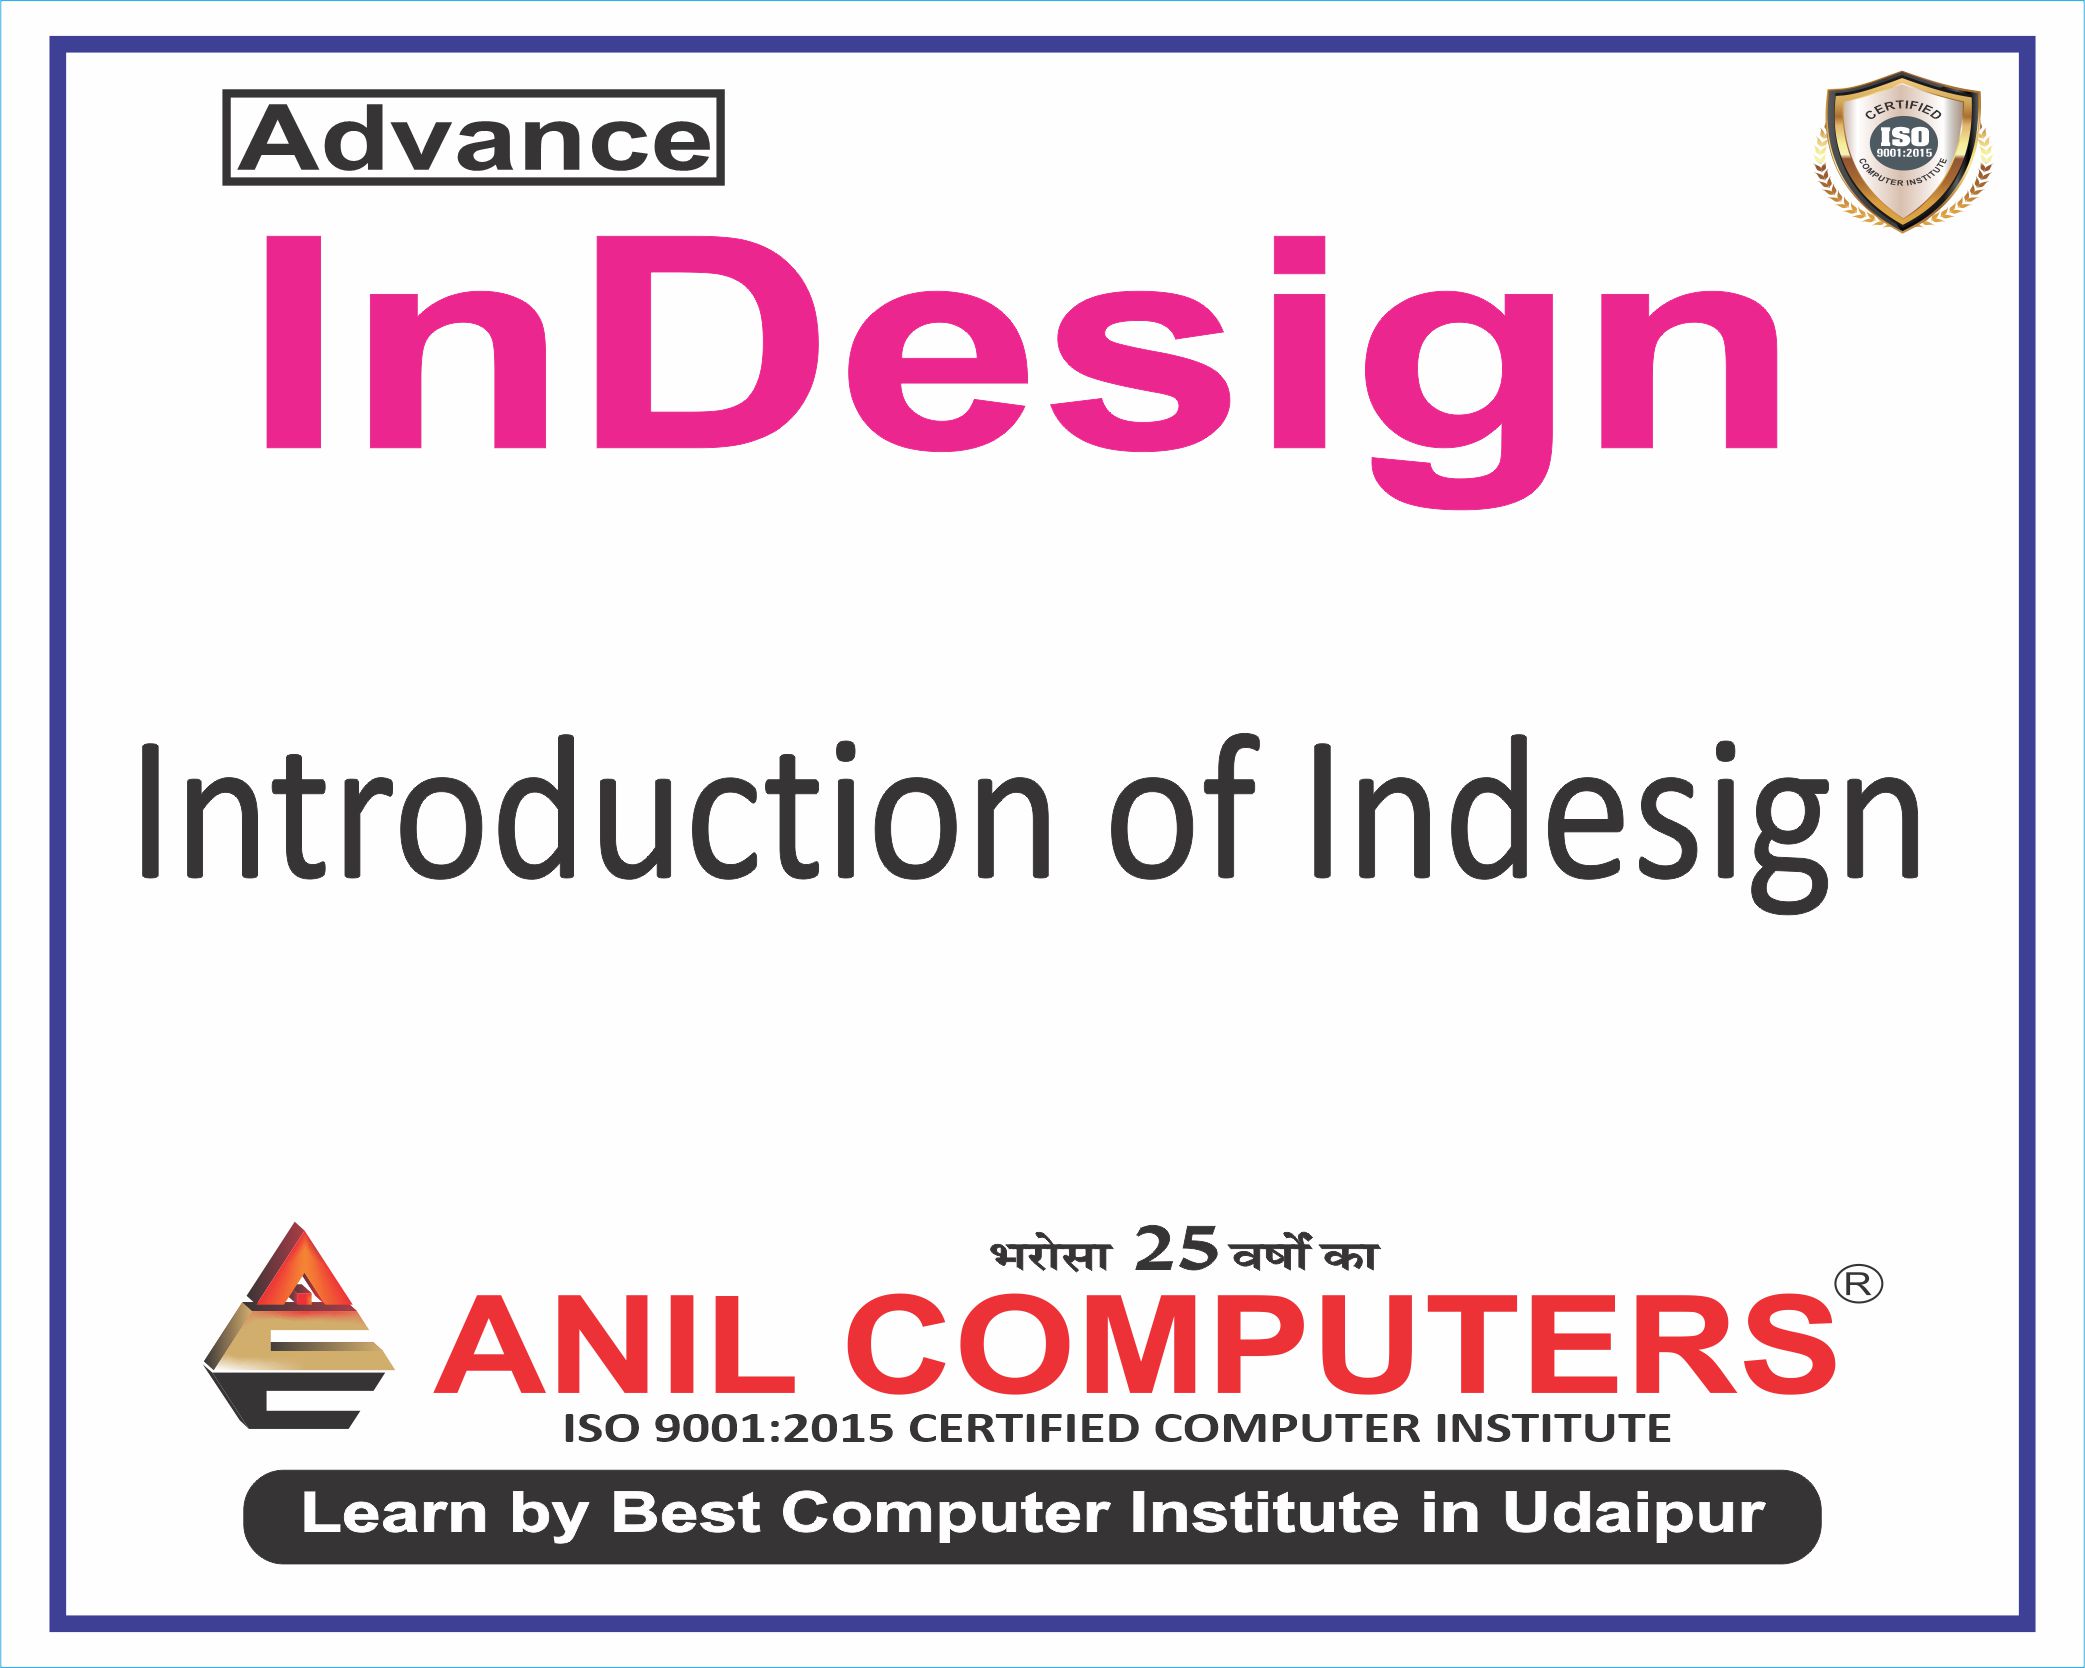 Introduction of Indesign